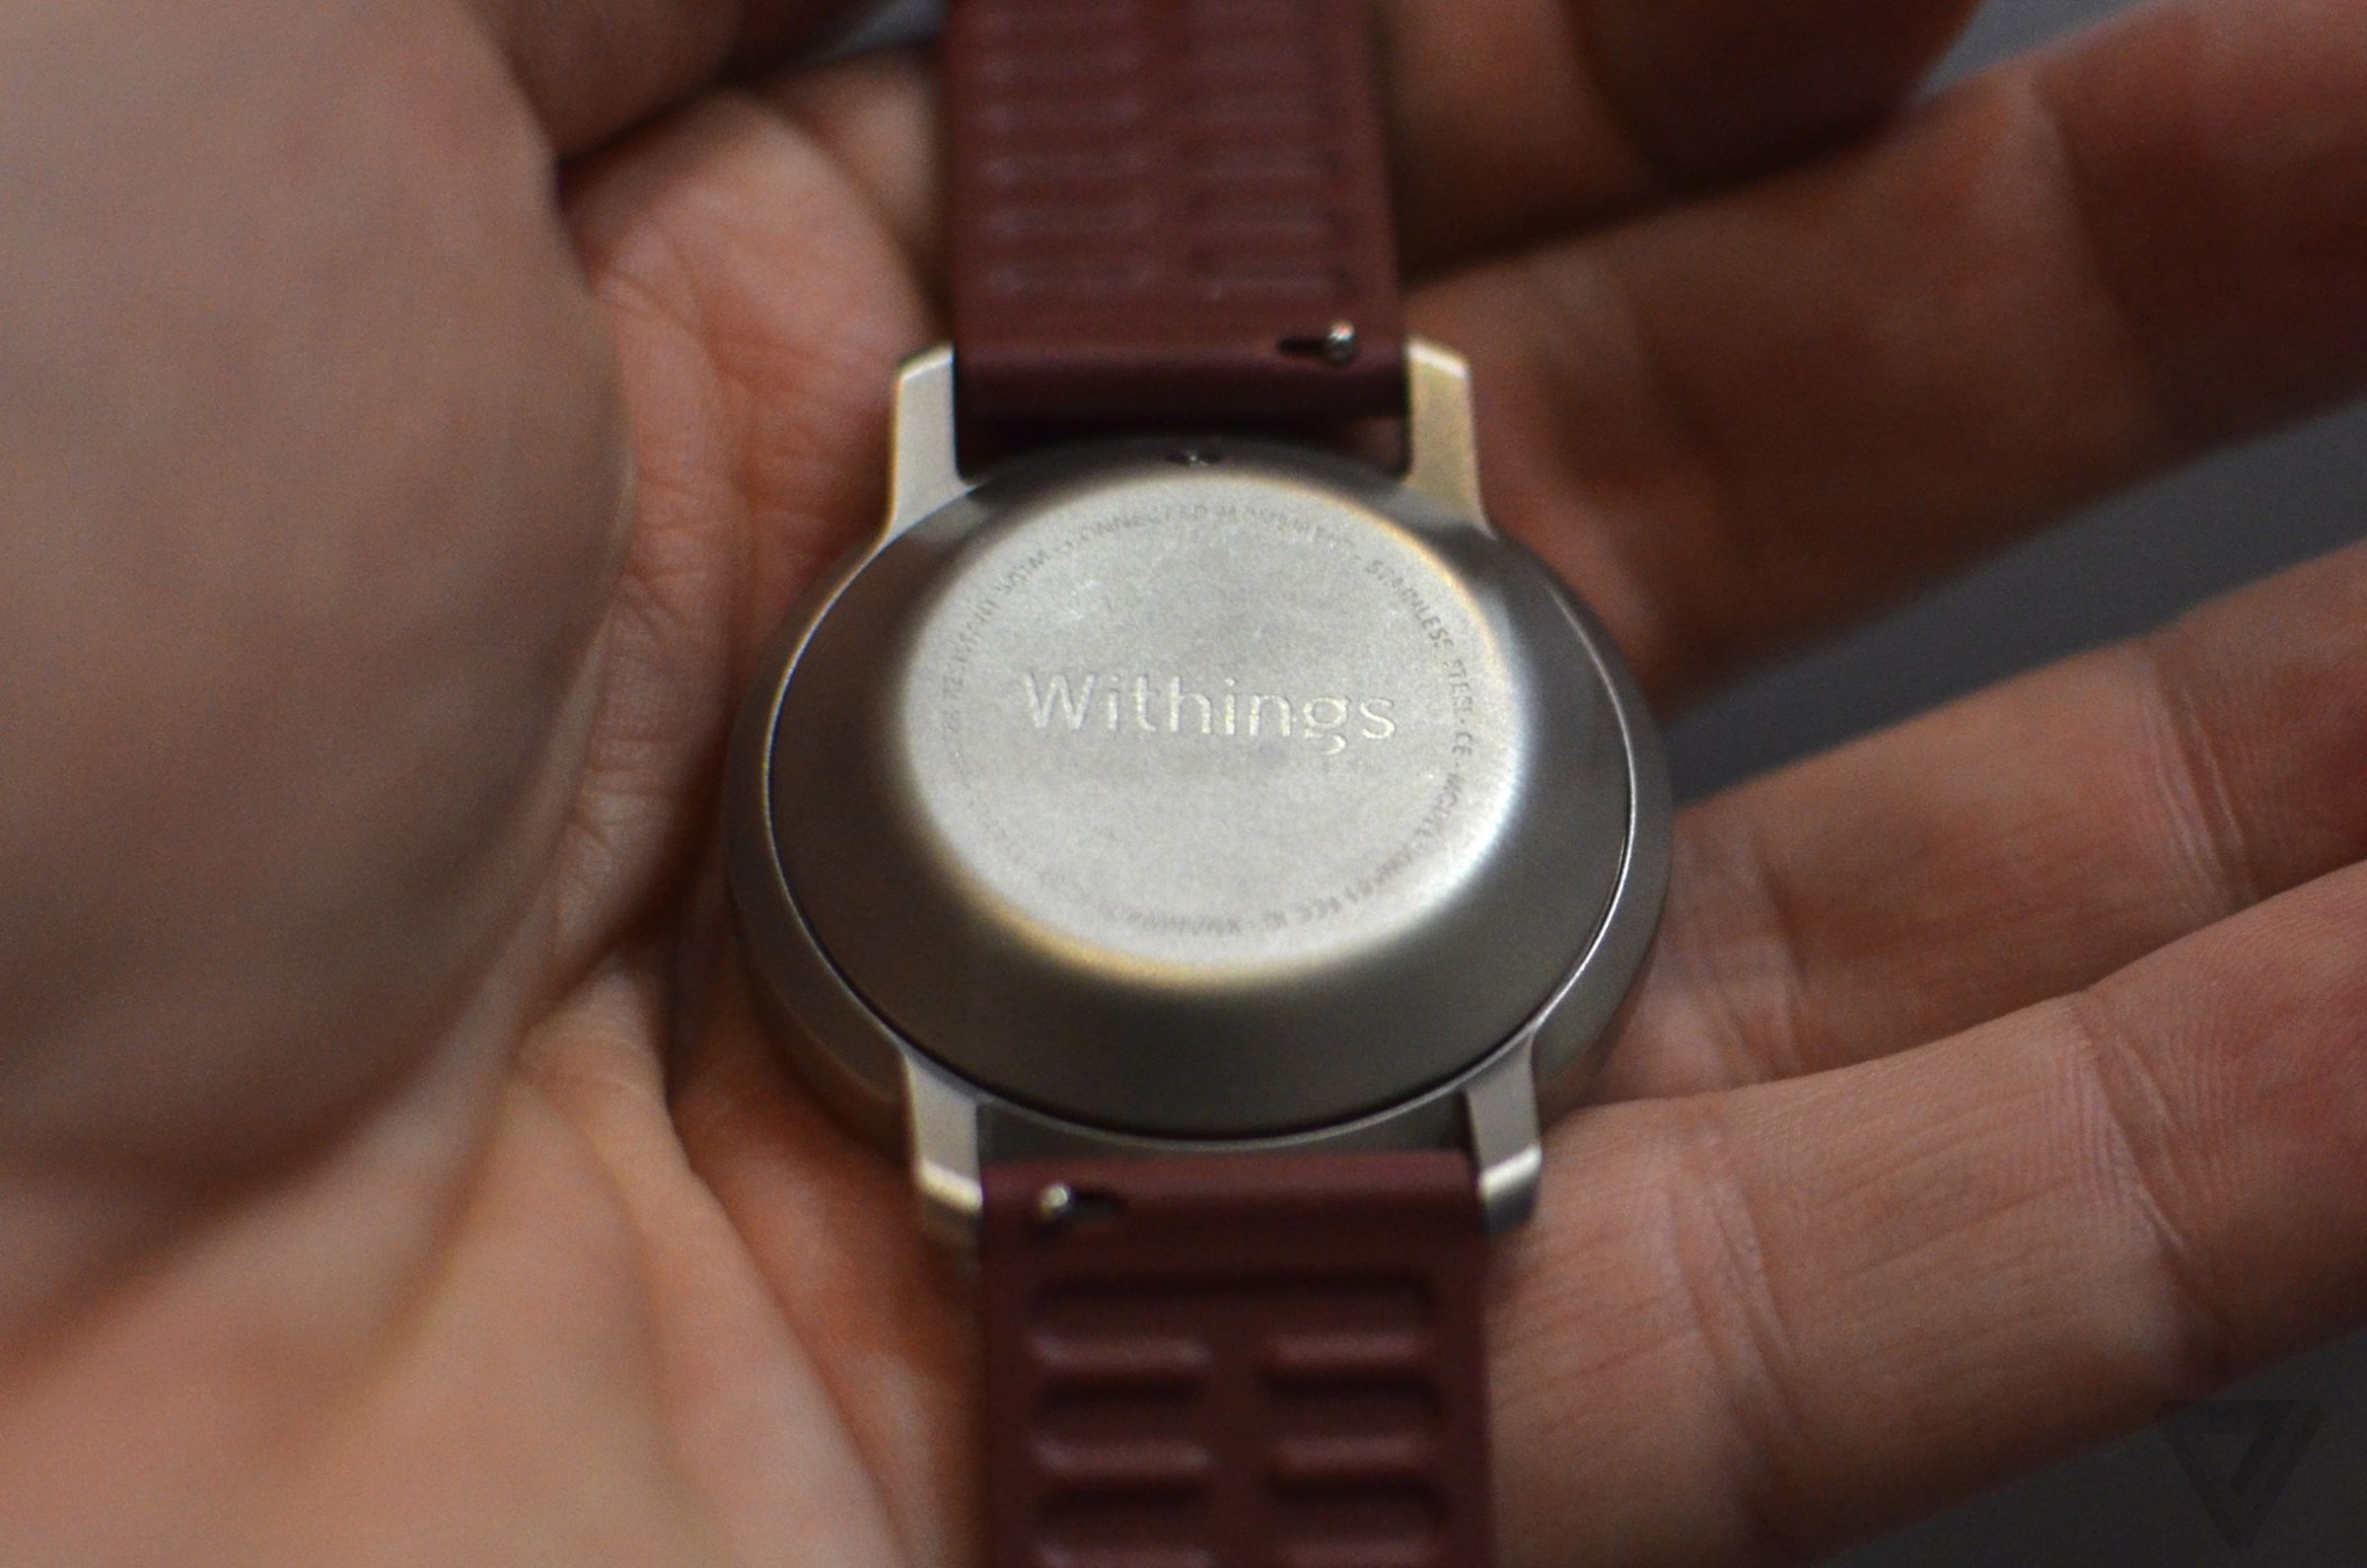 Withings Activité Pop hands-on images